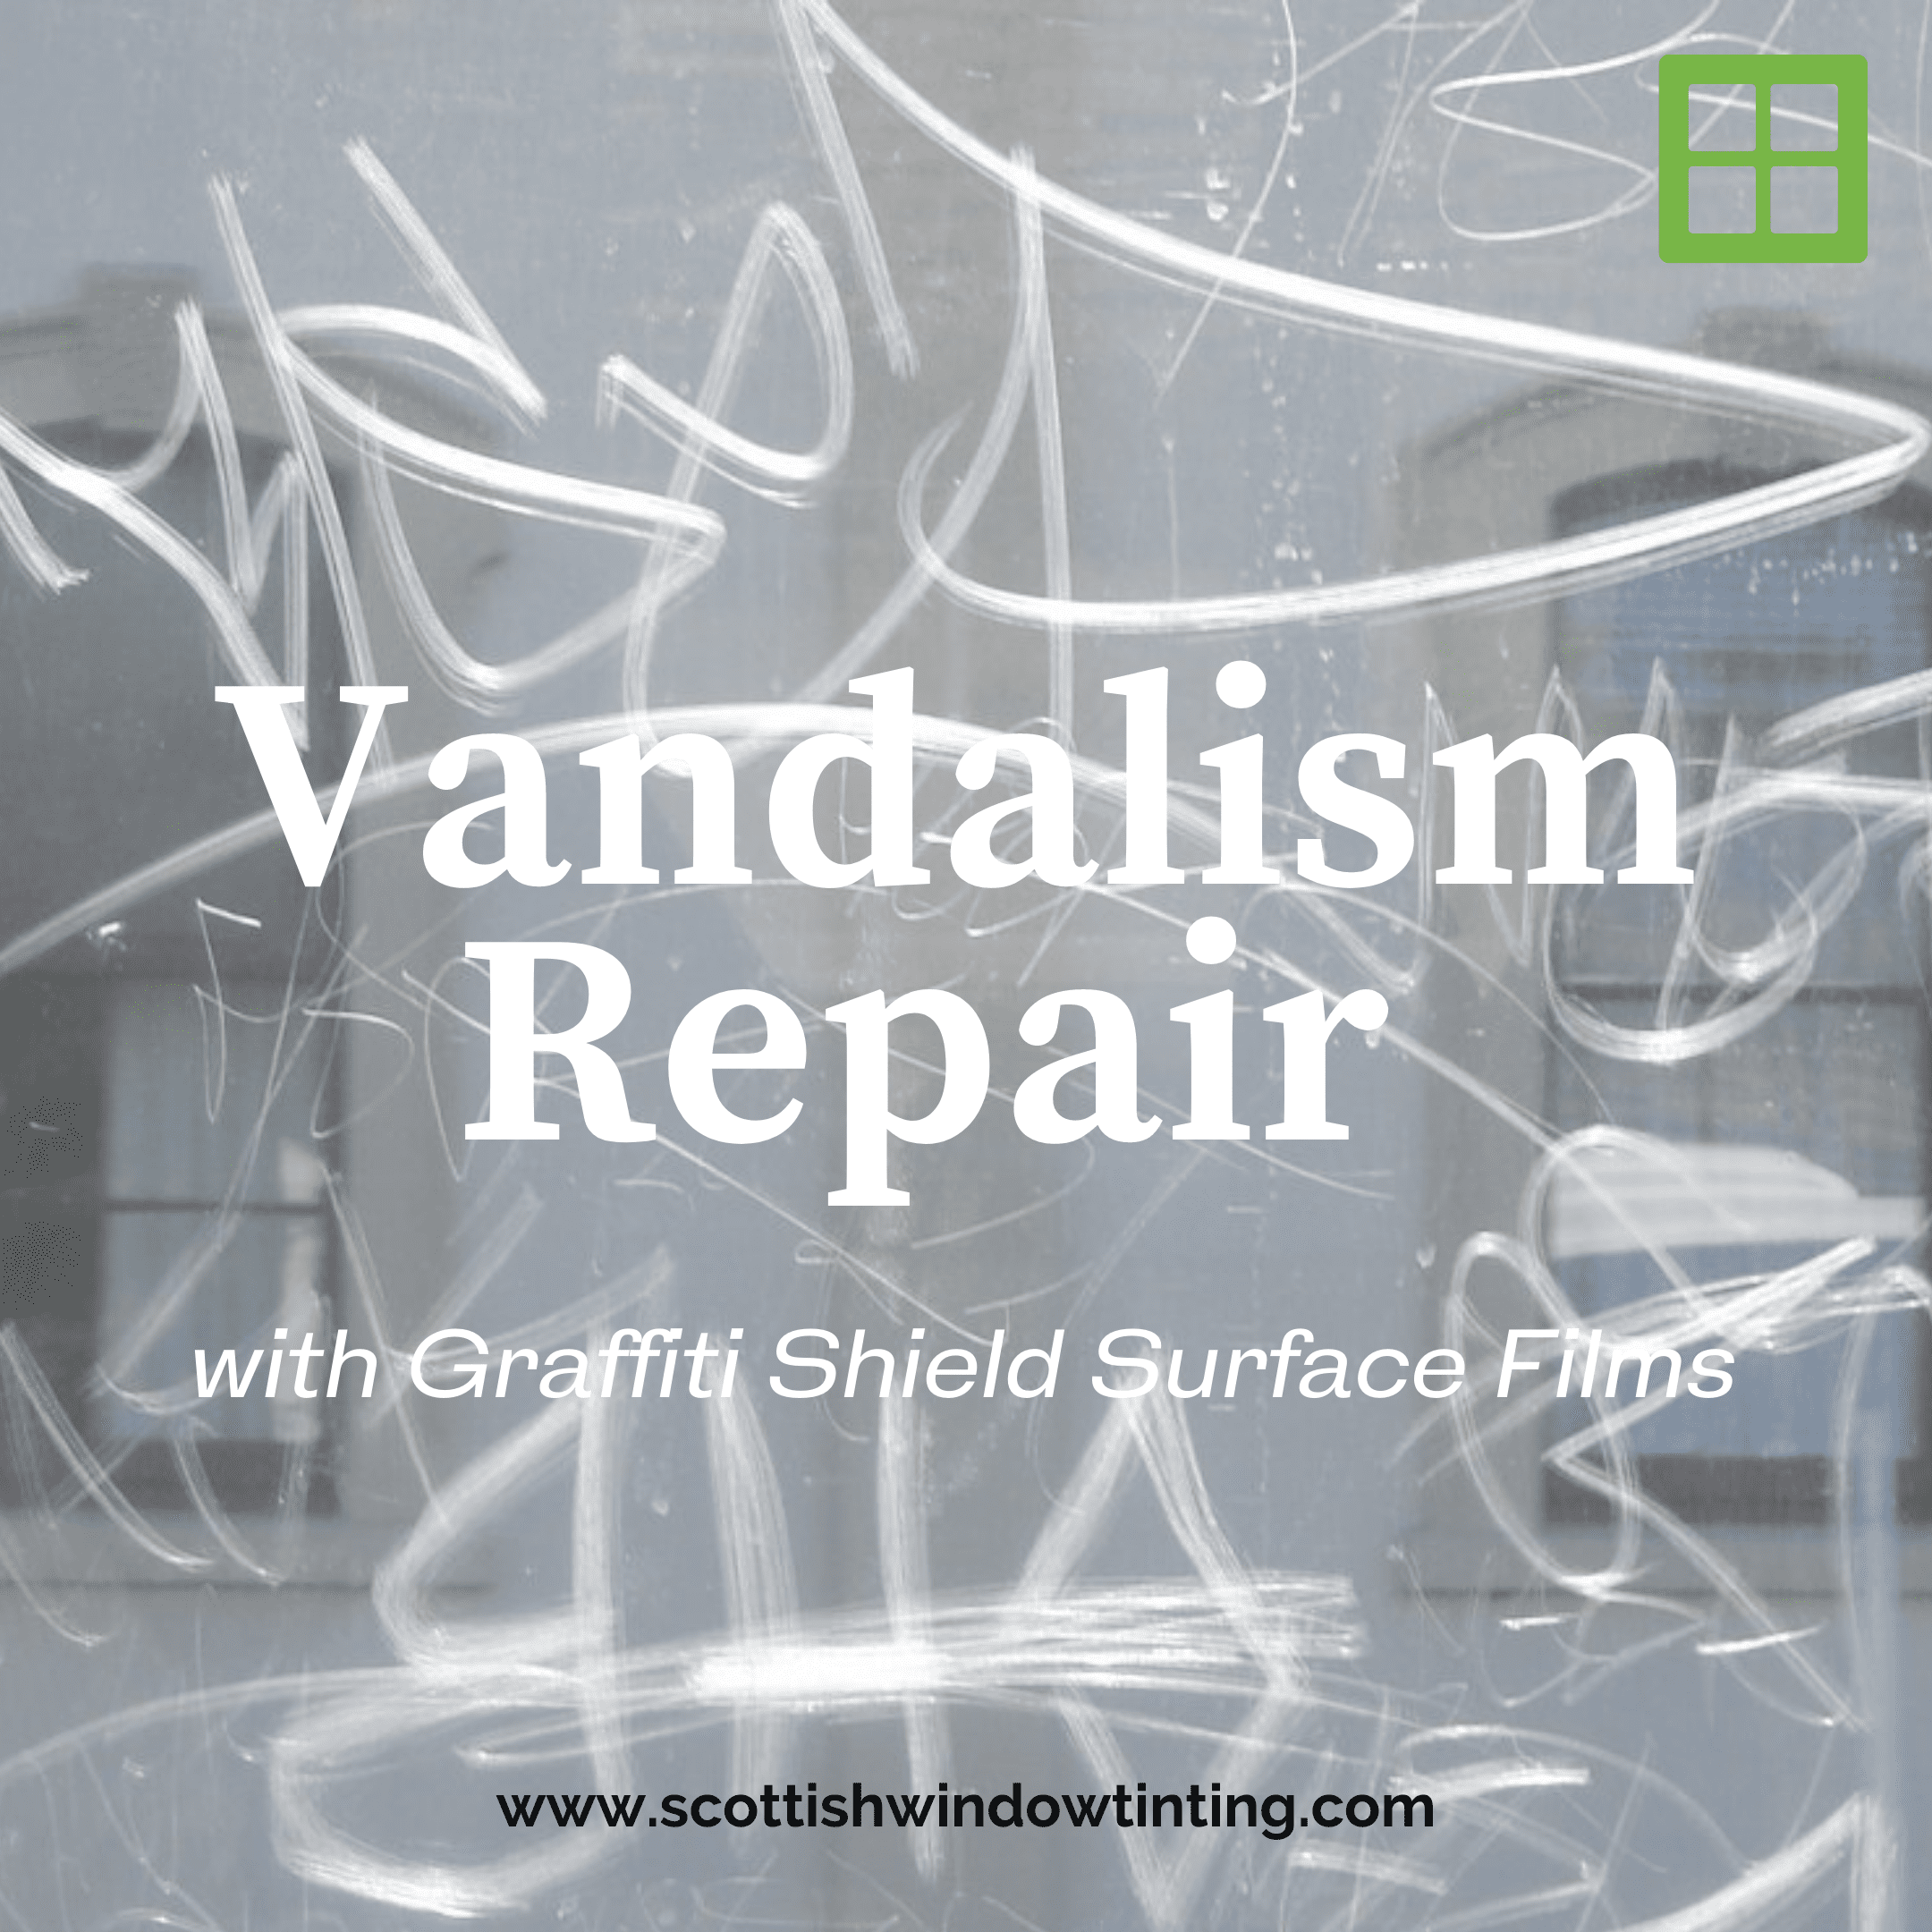 How to Repair Vandalism with Graffiti Shield Surface Films